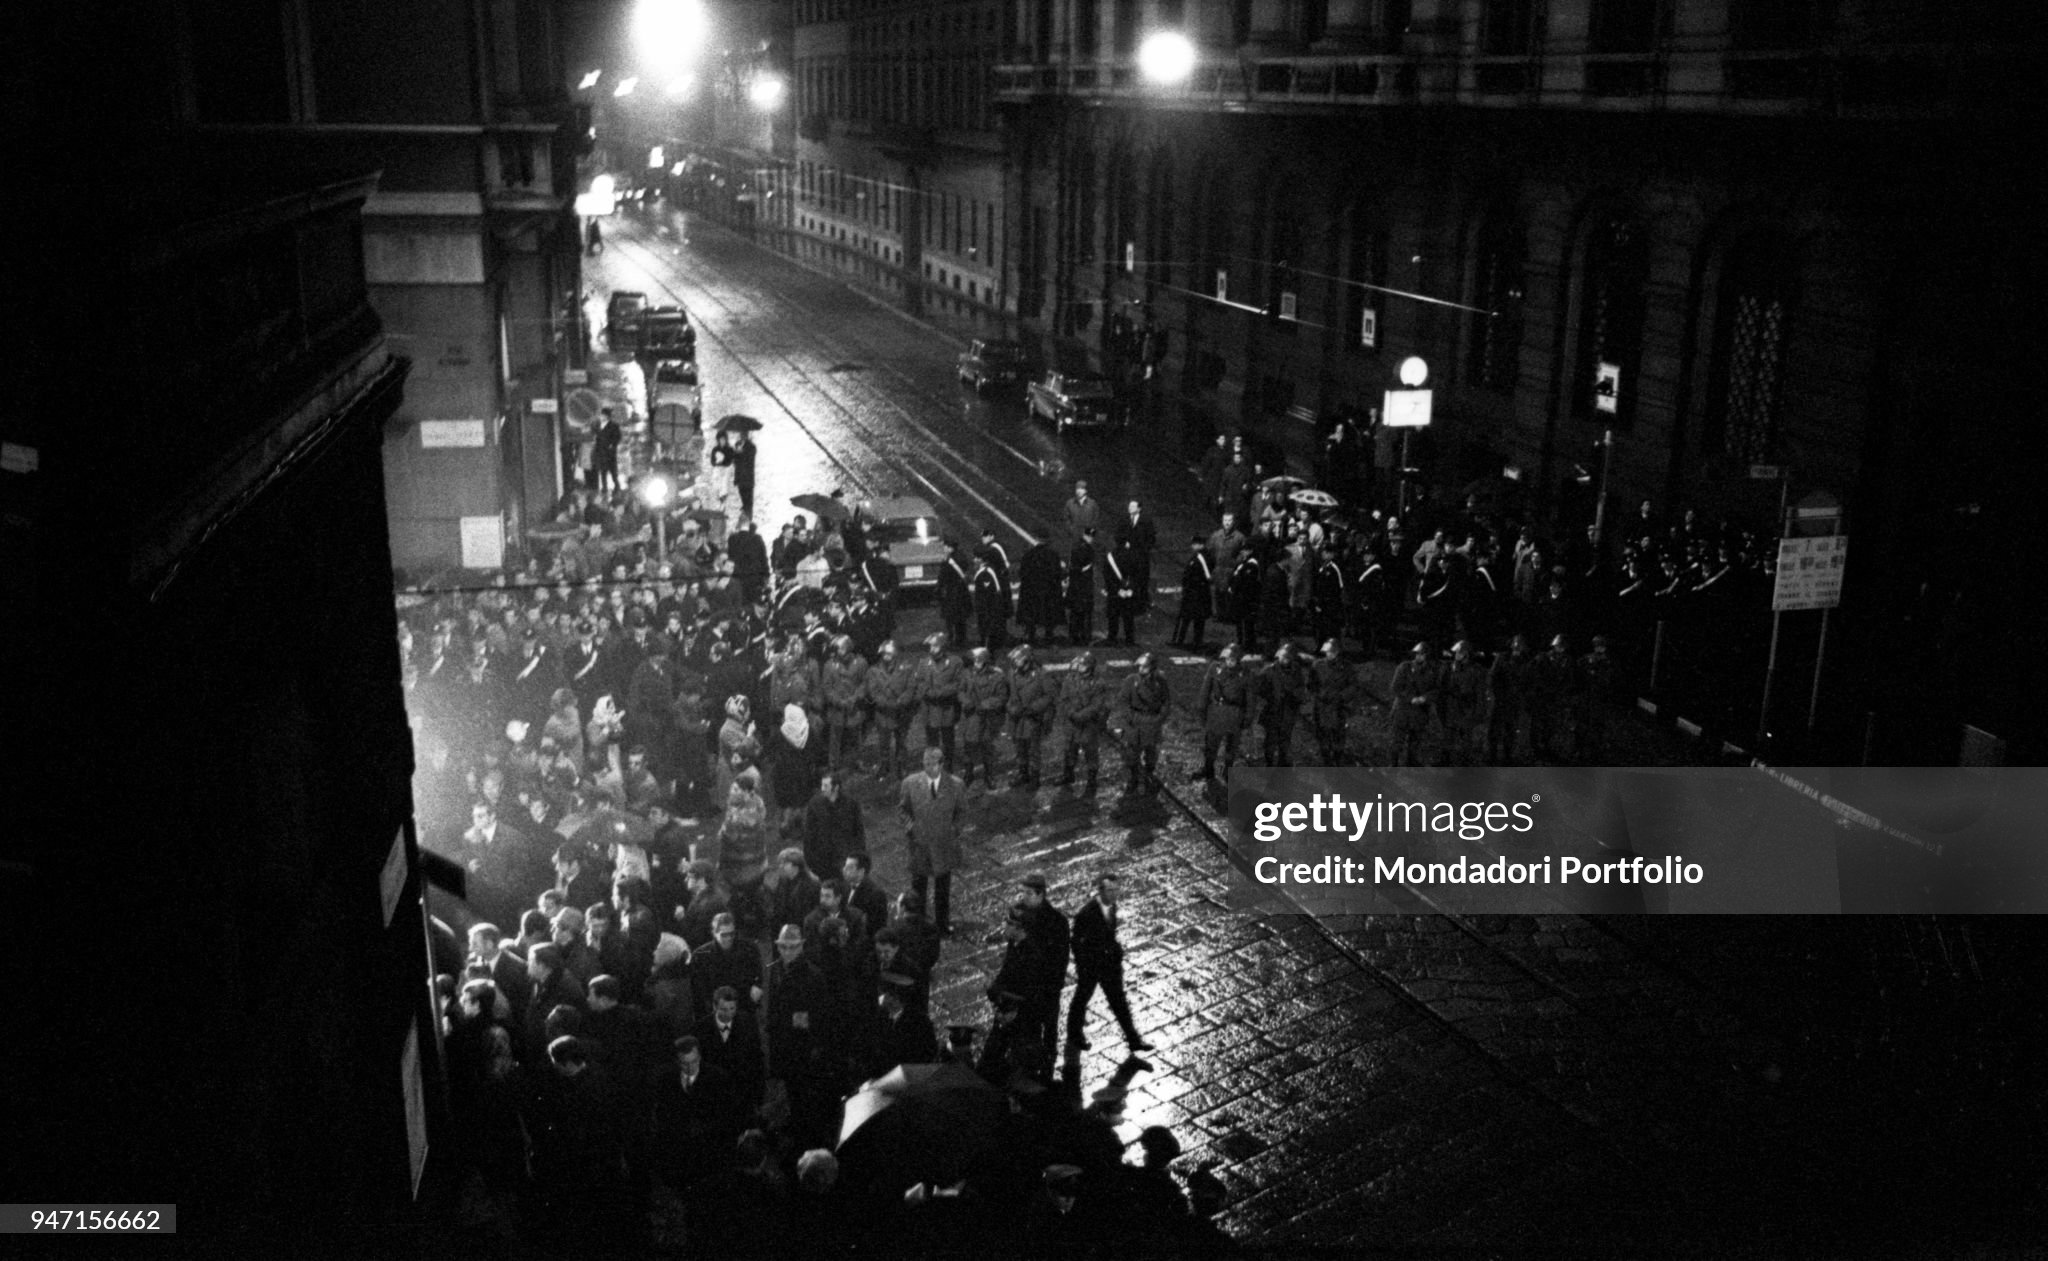 On the occasion of the opening night at La Scala in Milan on 07 December 1968, in via Manzoni the Police is trying to contain the demonstrators taken to the street. 